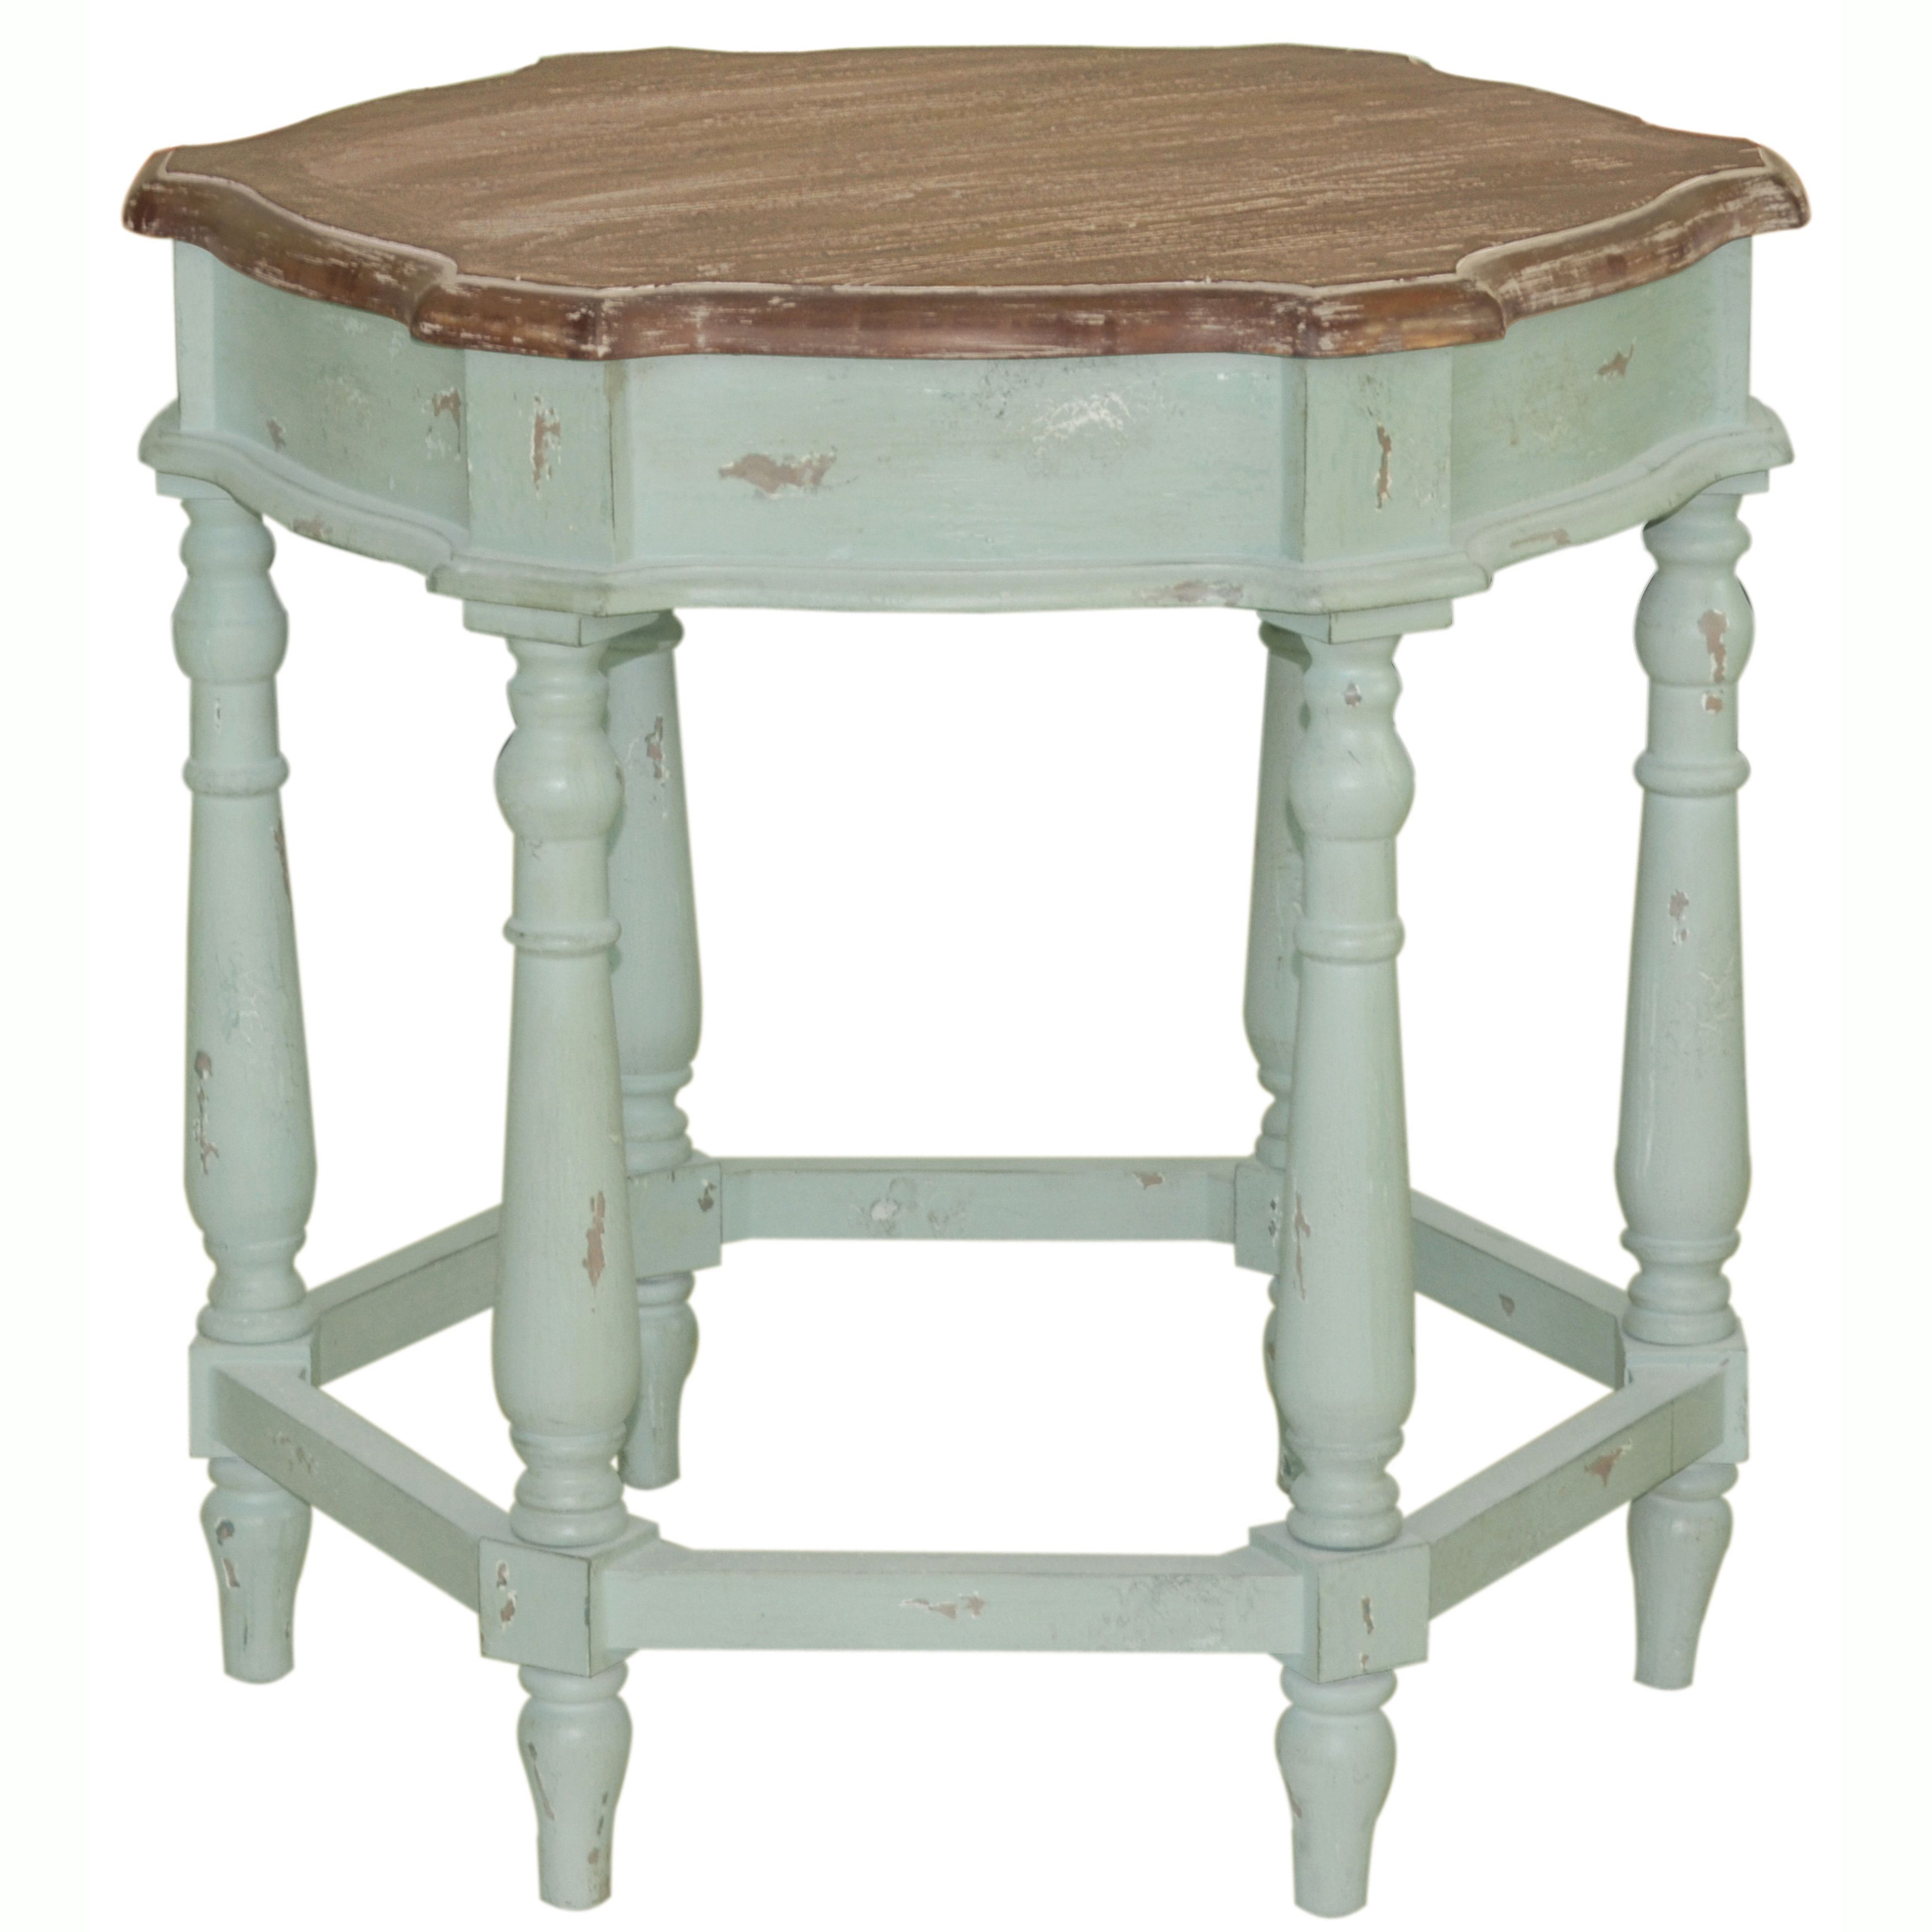 hand painted distressed pale blue finish accent table white ping great farm with bench inexpensive entry cherry side dining room tables edmonton teton village modern rustic